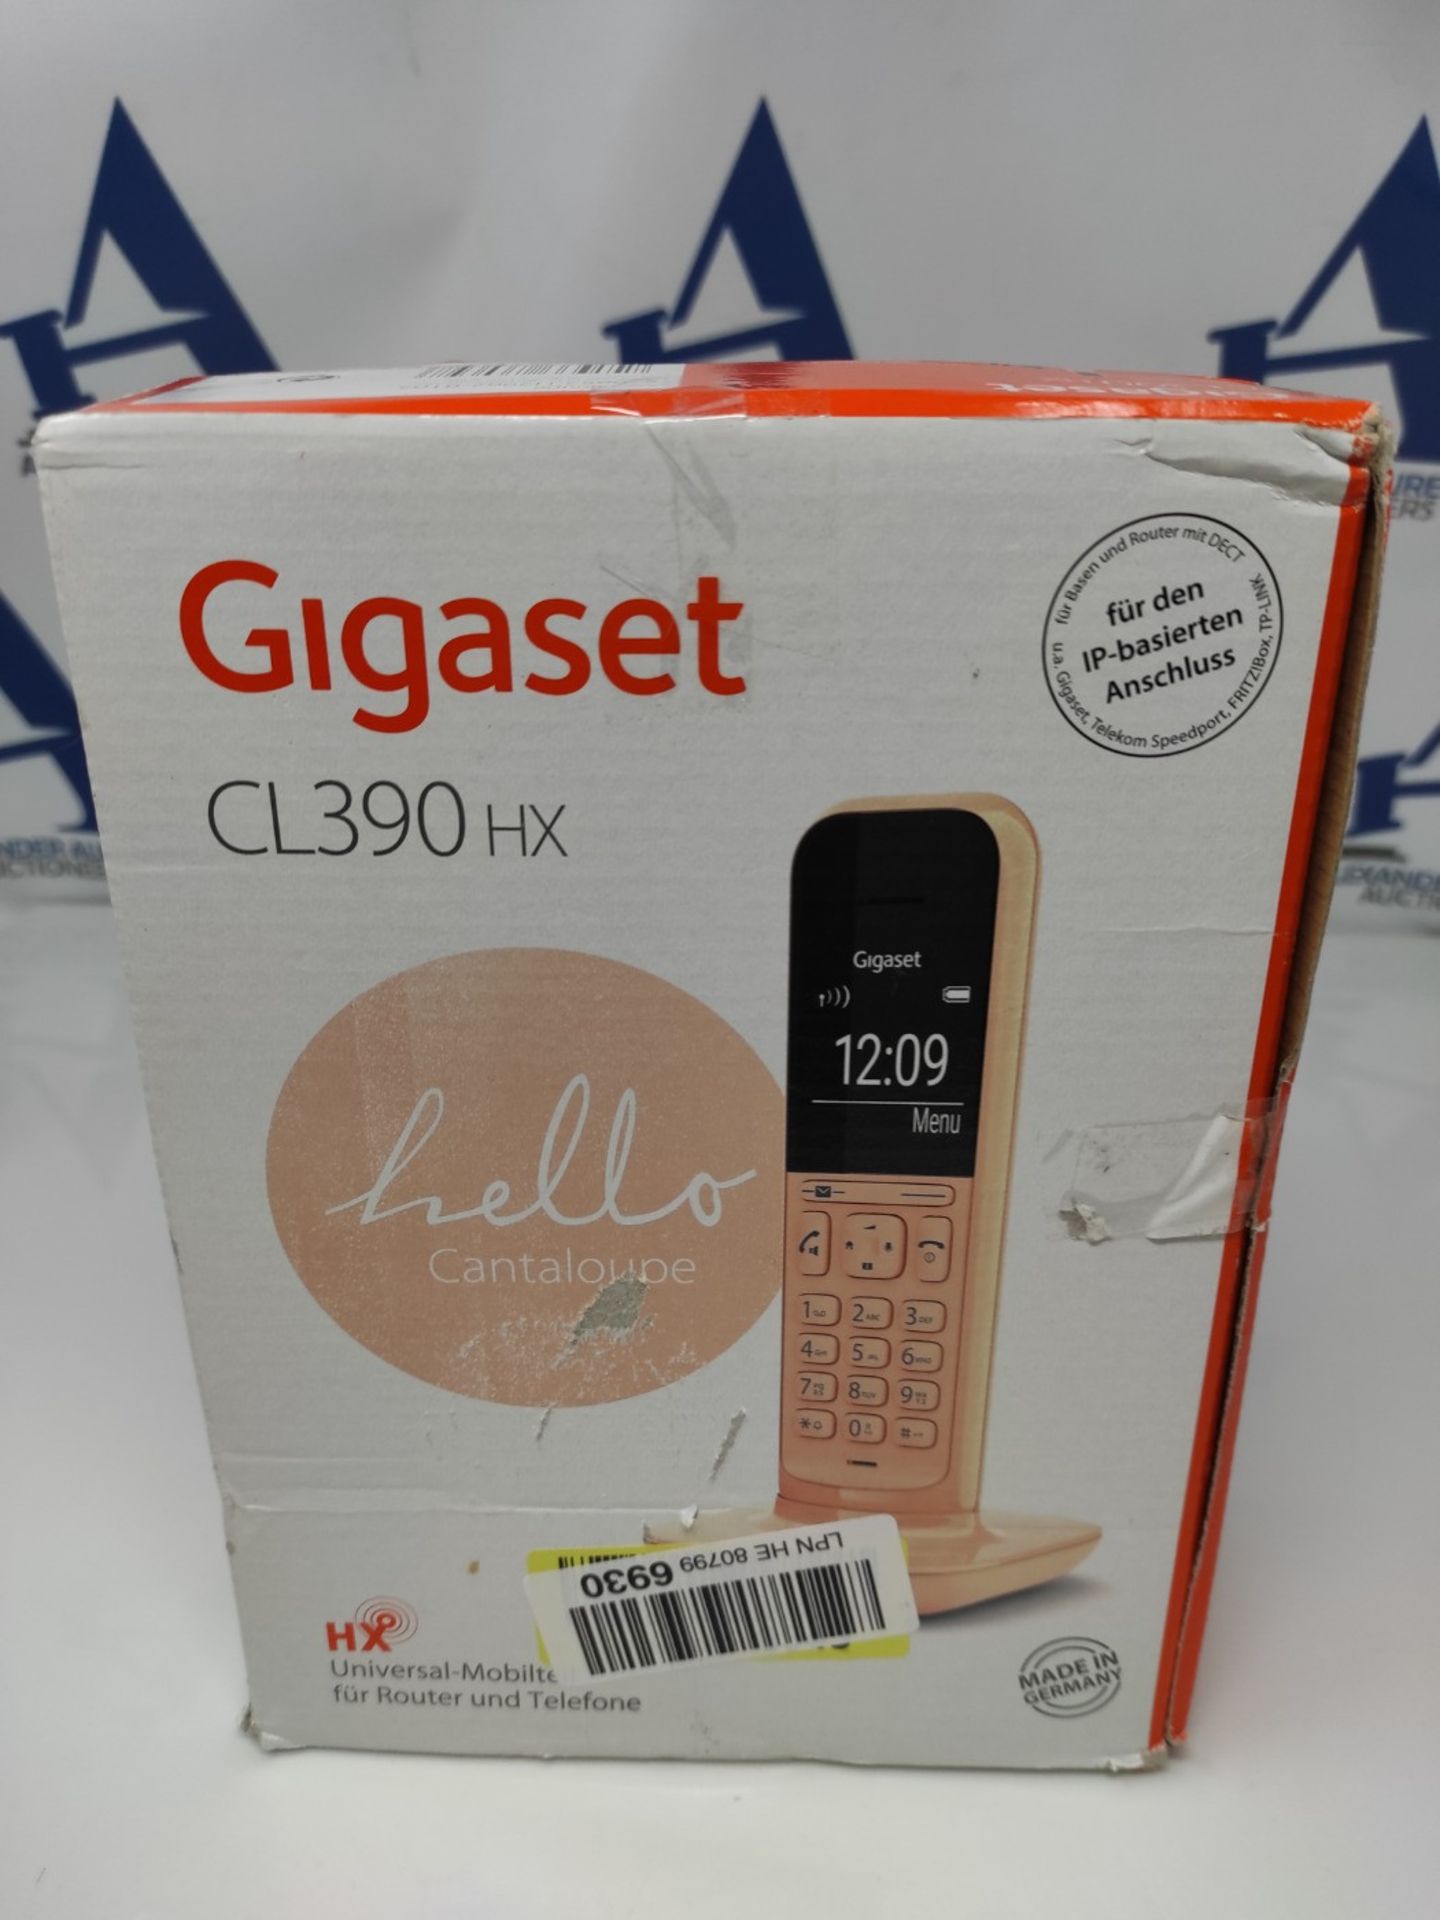 Gigaset CL390HX - Design DECT handset with charging cradle - Cordless phone for router - Image 2 of 3